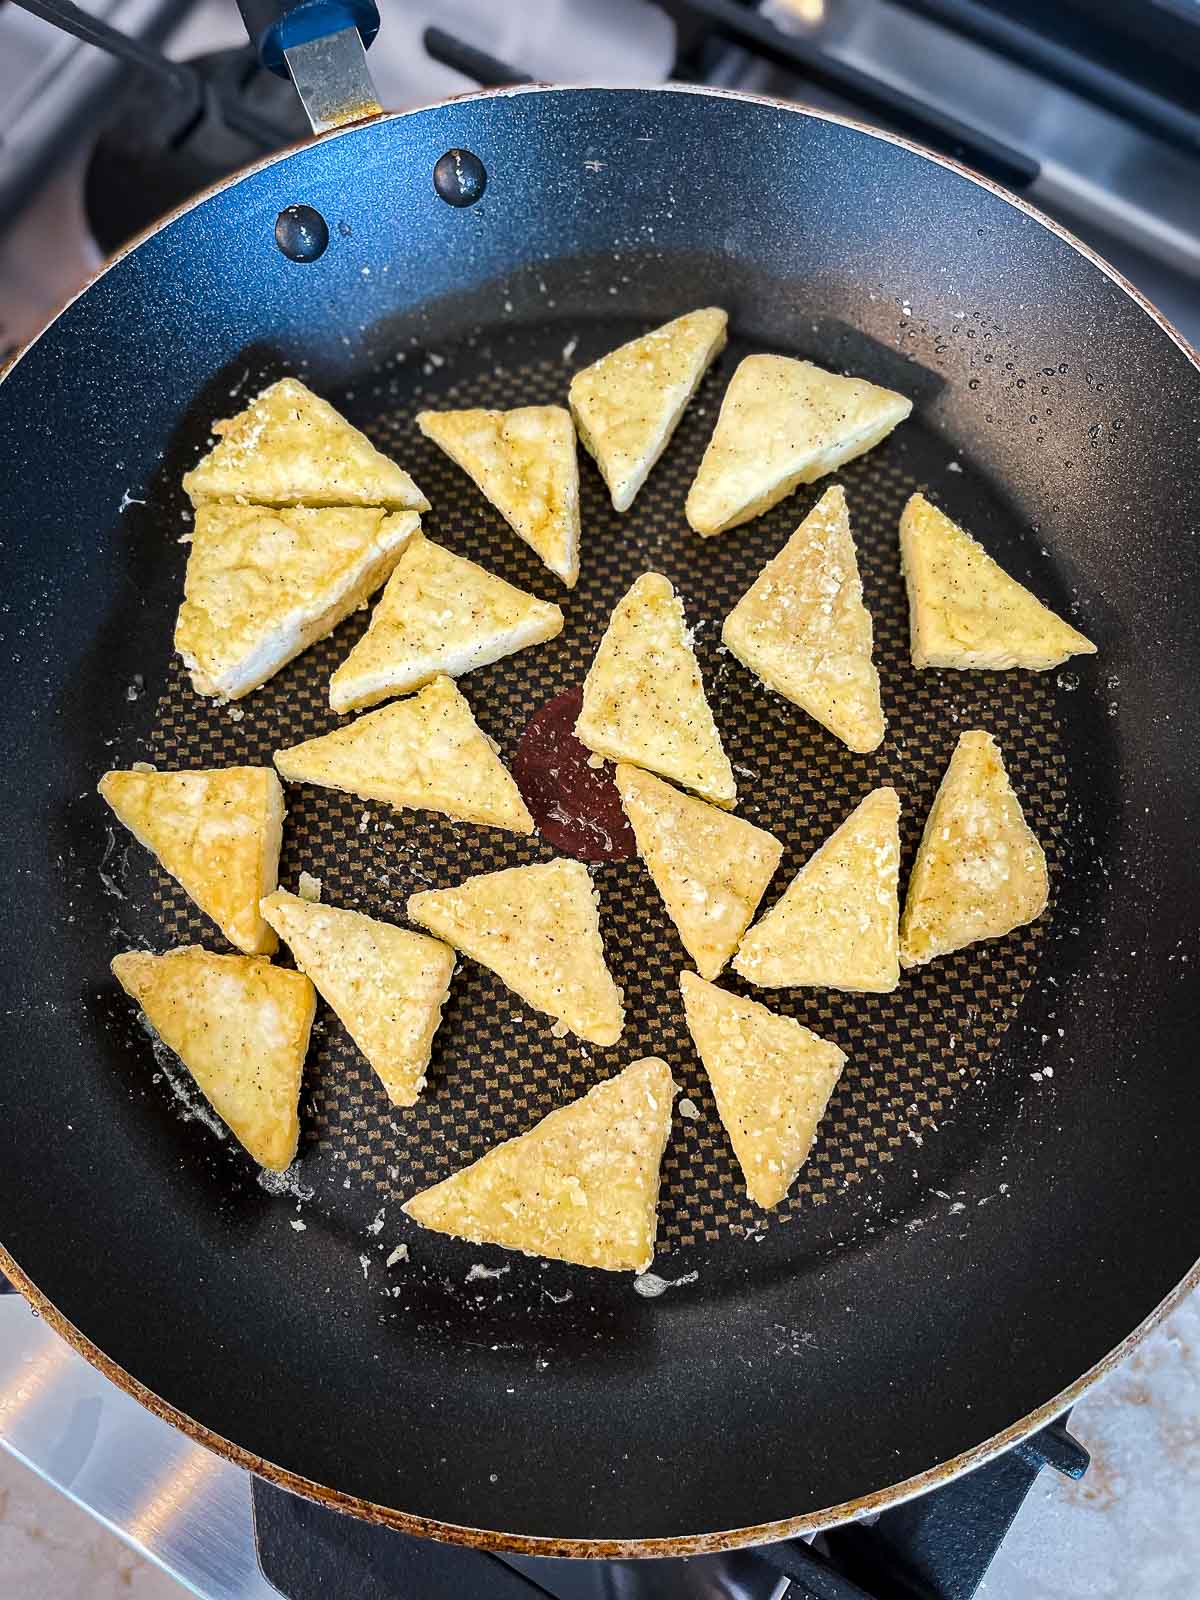 Tofu triangle steaks being fried and browned in a frying pan on top of a stove.